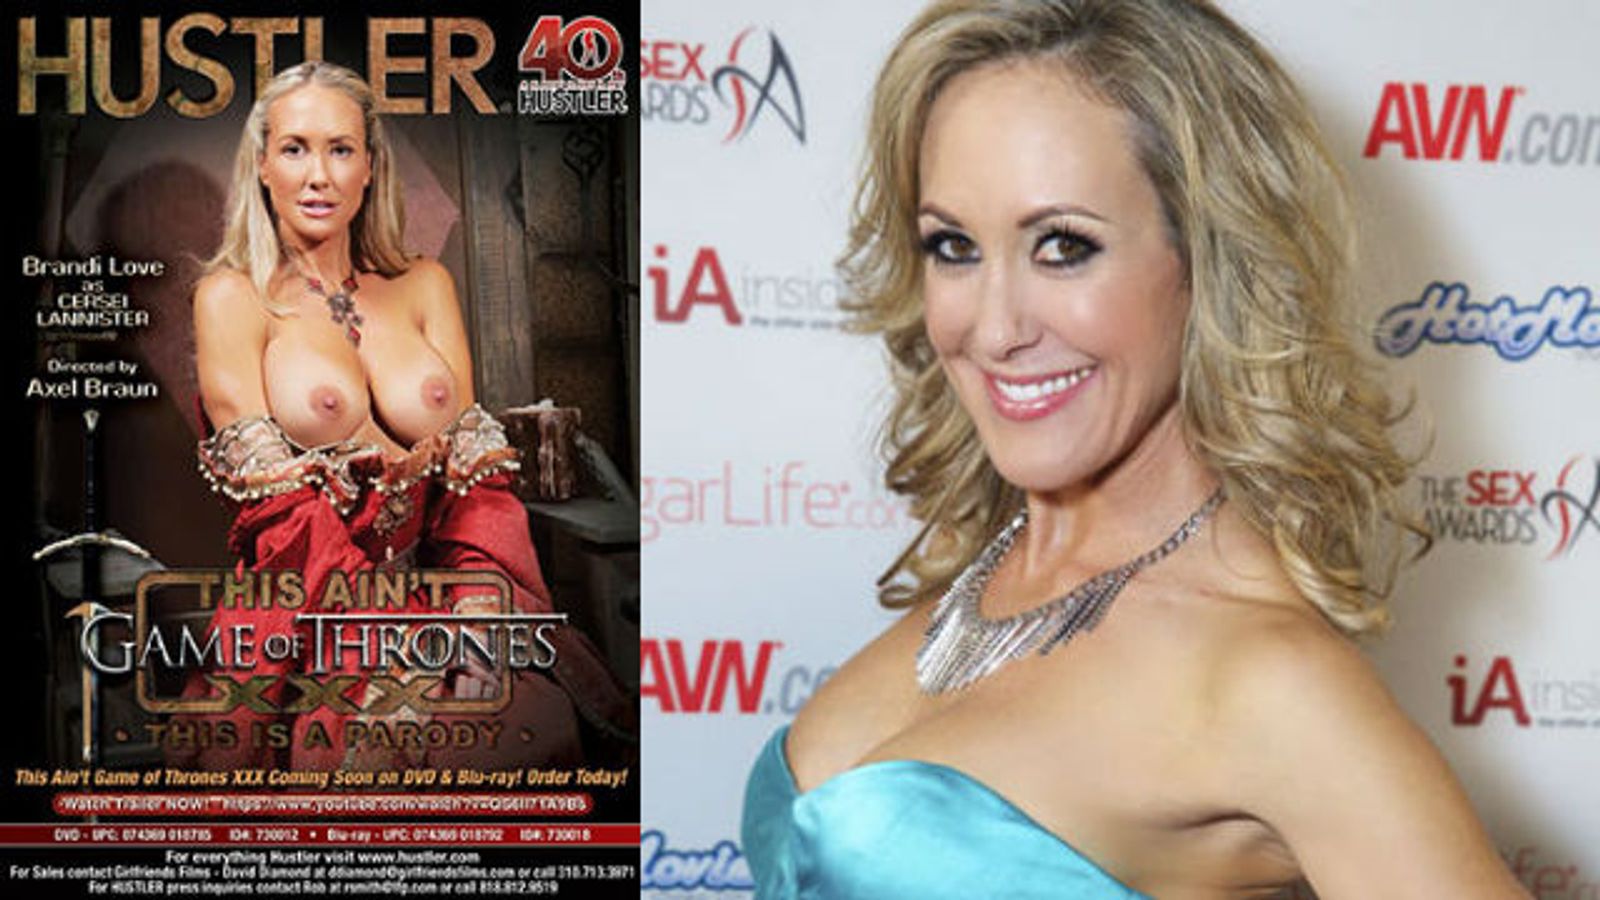 Now Available: Brandi Love in ‘This Ain’t Game of Thrones XXX’